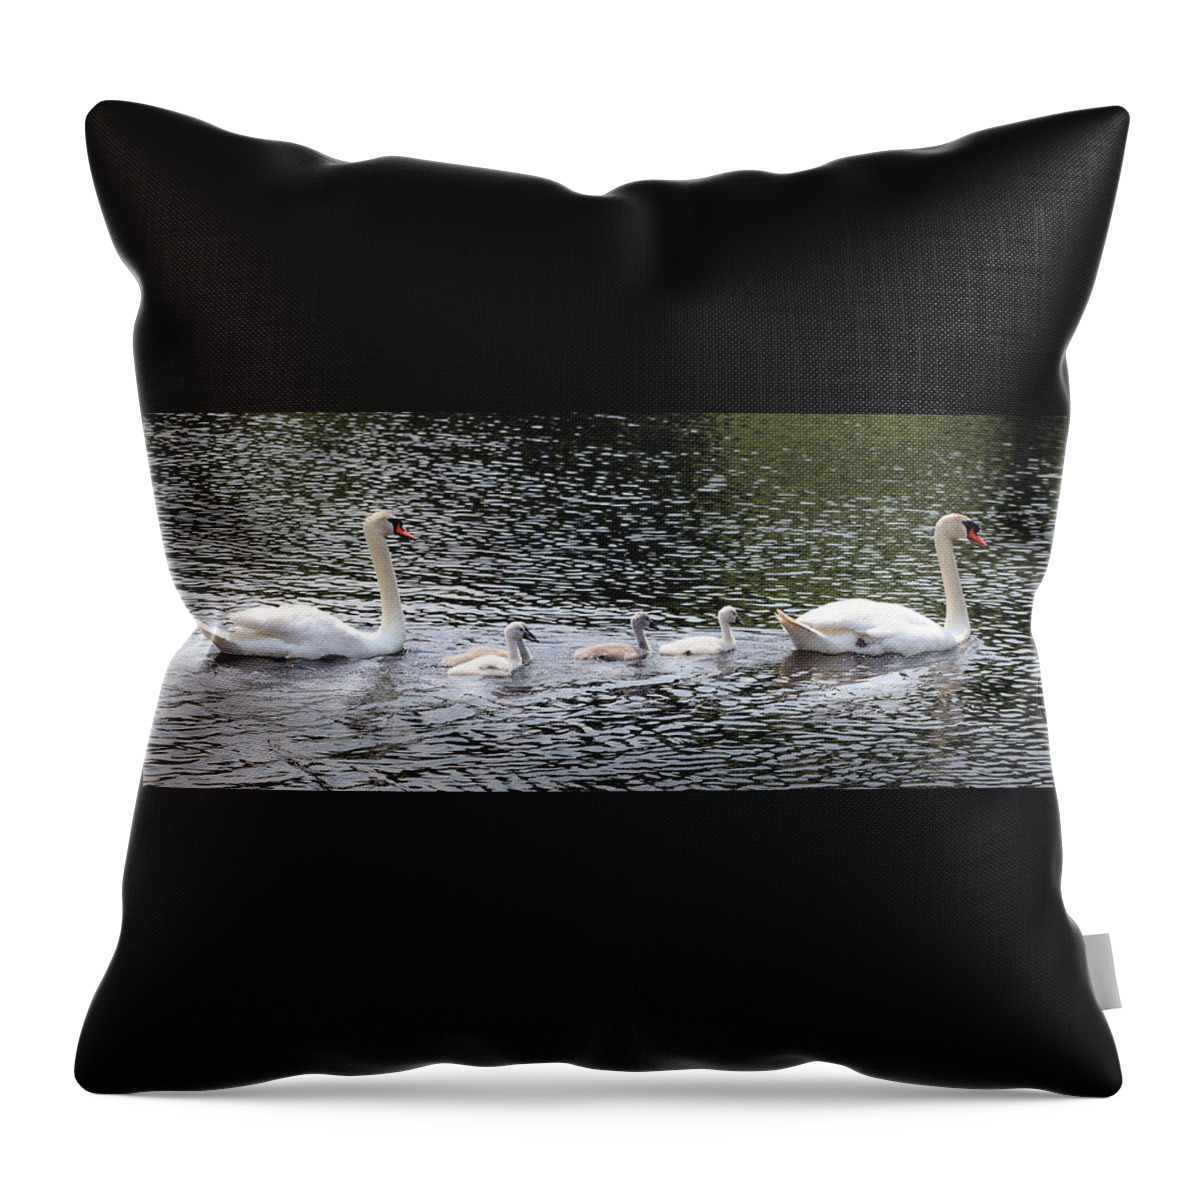 Swan Family Throw Pillow featuring the photograph The Swan Family by David T Wilkinson